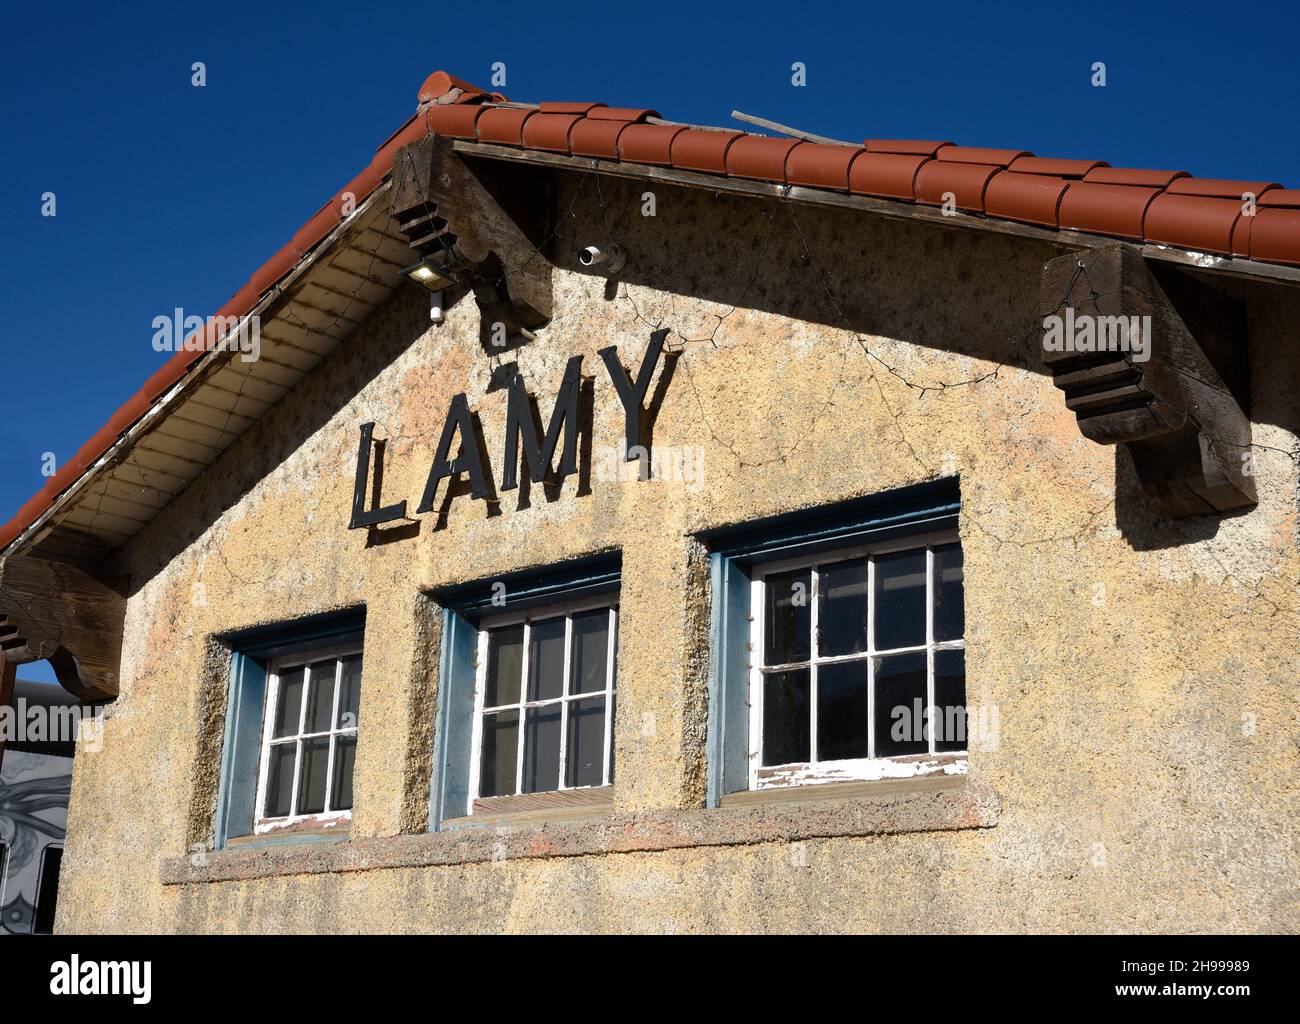 The Lamy train station in Lamy, New Mexico, was built in 1909. The station is a daily stop for the Southwest Chief passenger train operated by Amtrak Stock Photo